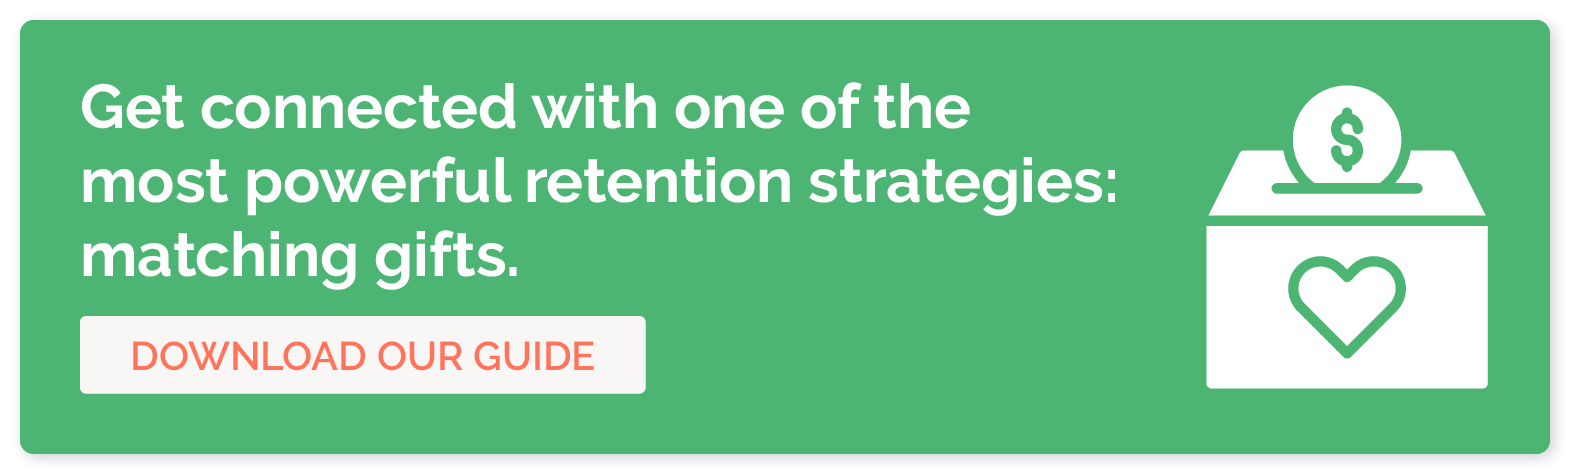 Get connected with one of the most powerful retention strategies: matching gifts. Download our guide. 